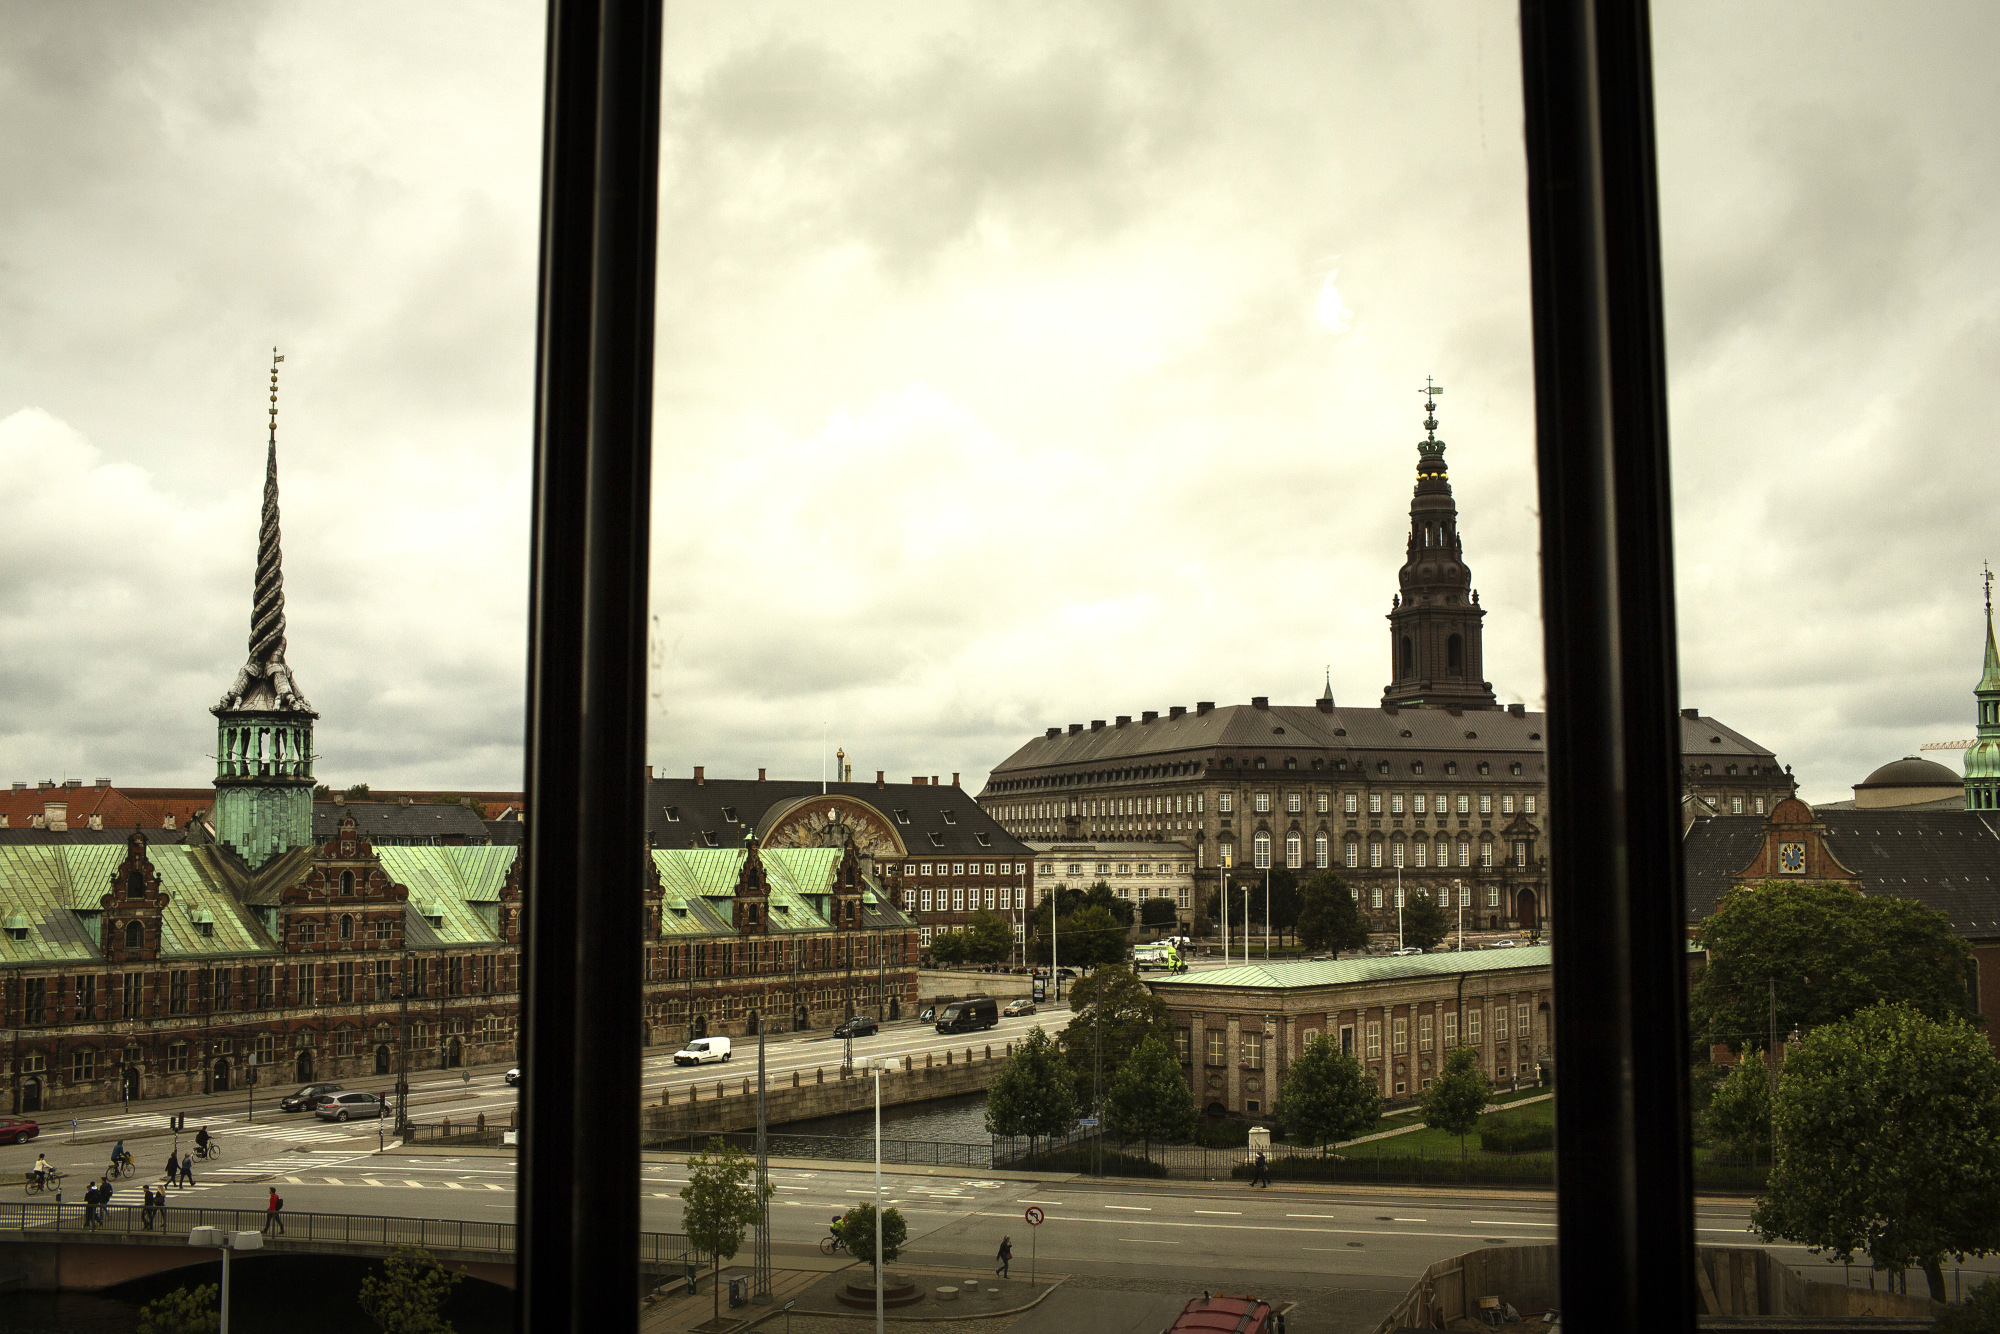 The old stock exchange building, left, also known as Borsbygningen, and Christiansborg Palace, right, sit on the city skyline seen from the headquarters of the Danish central bank in Copenhagen.